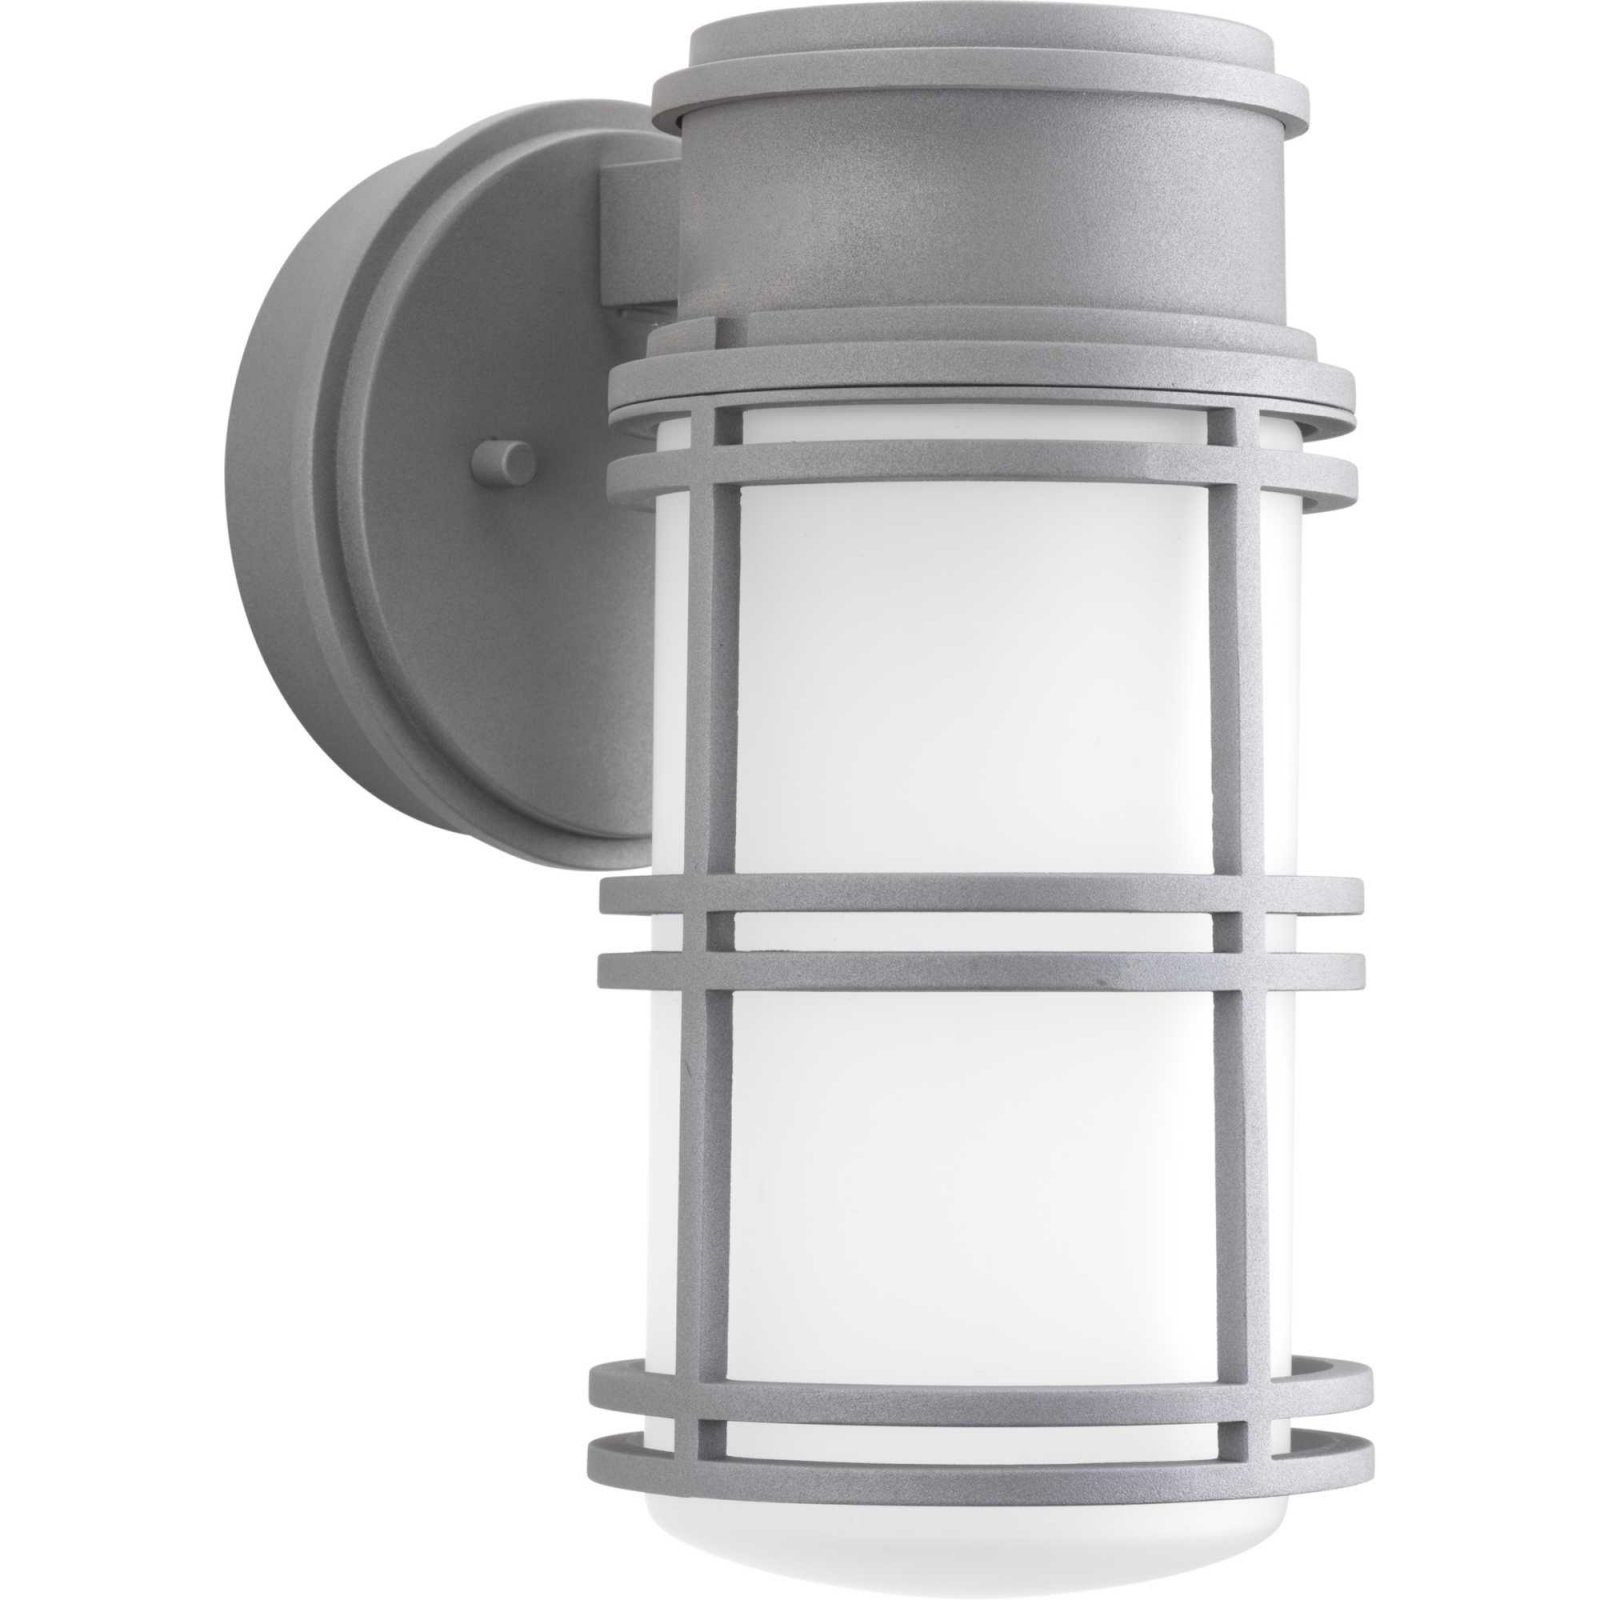 Bell Collection Small Led Wall Lantern - image 2 of 2